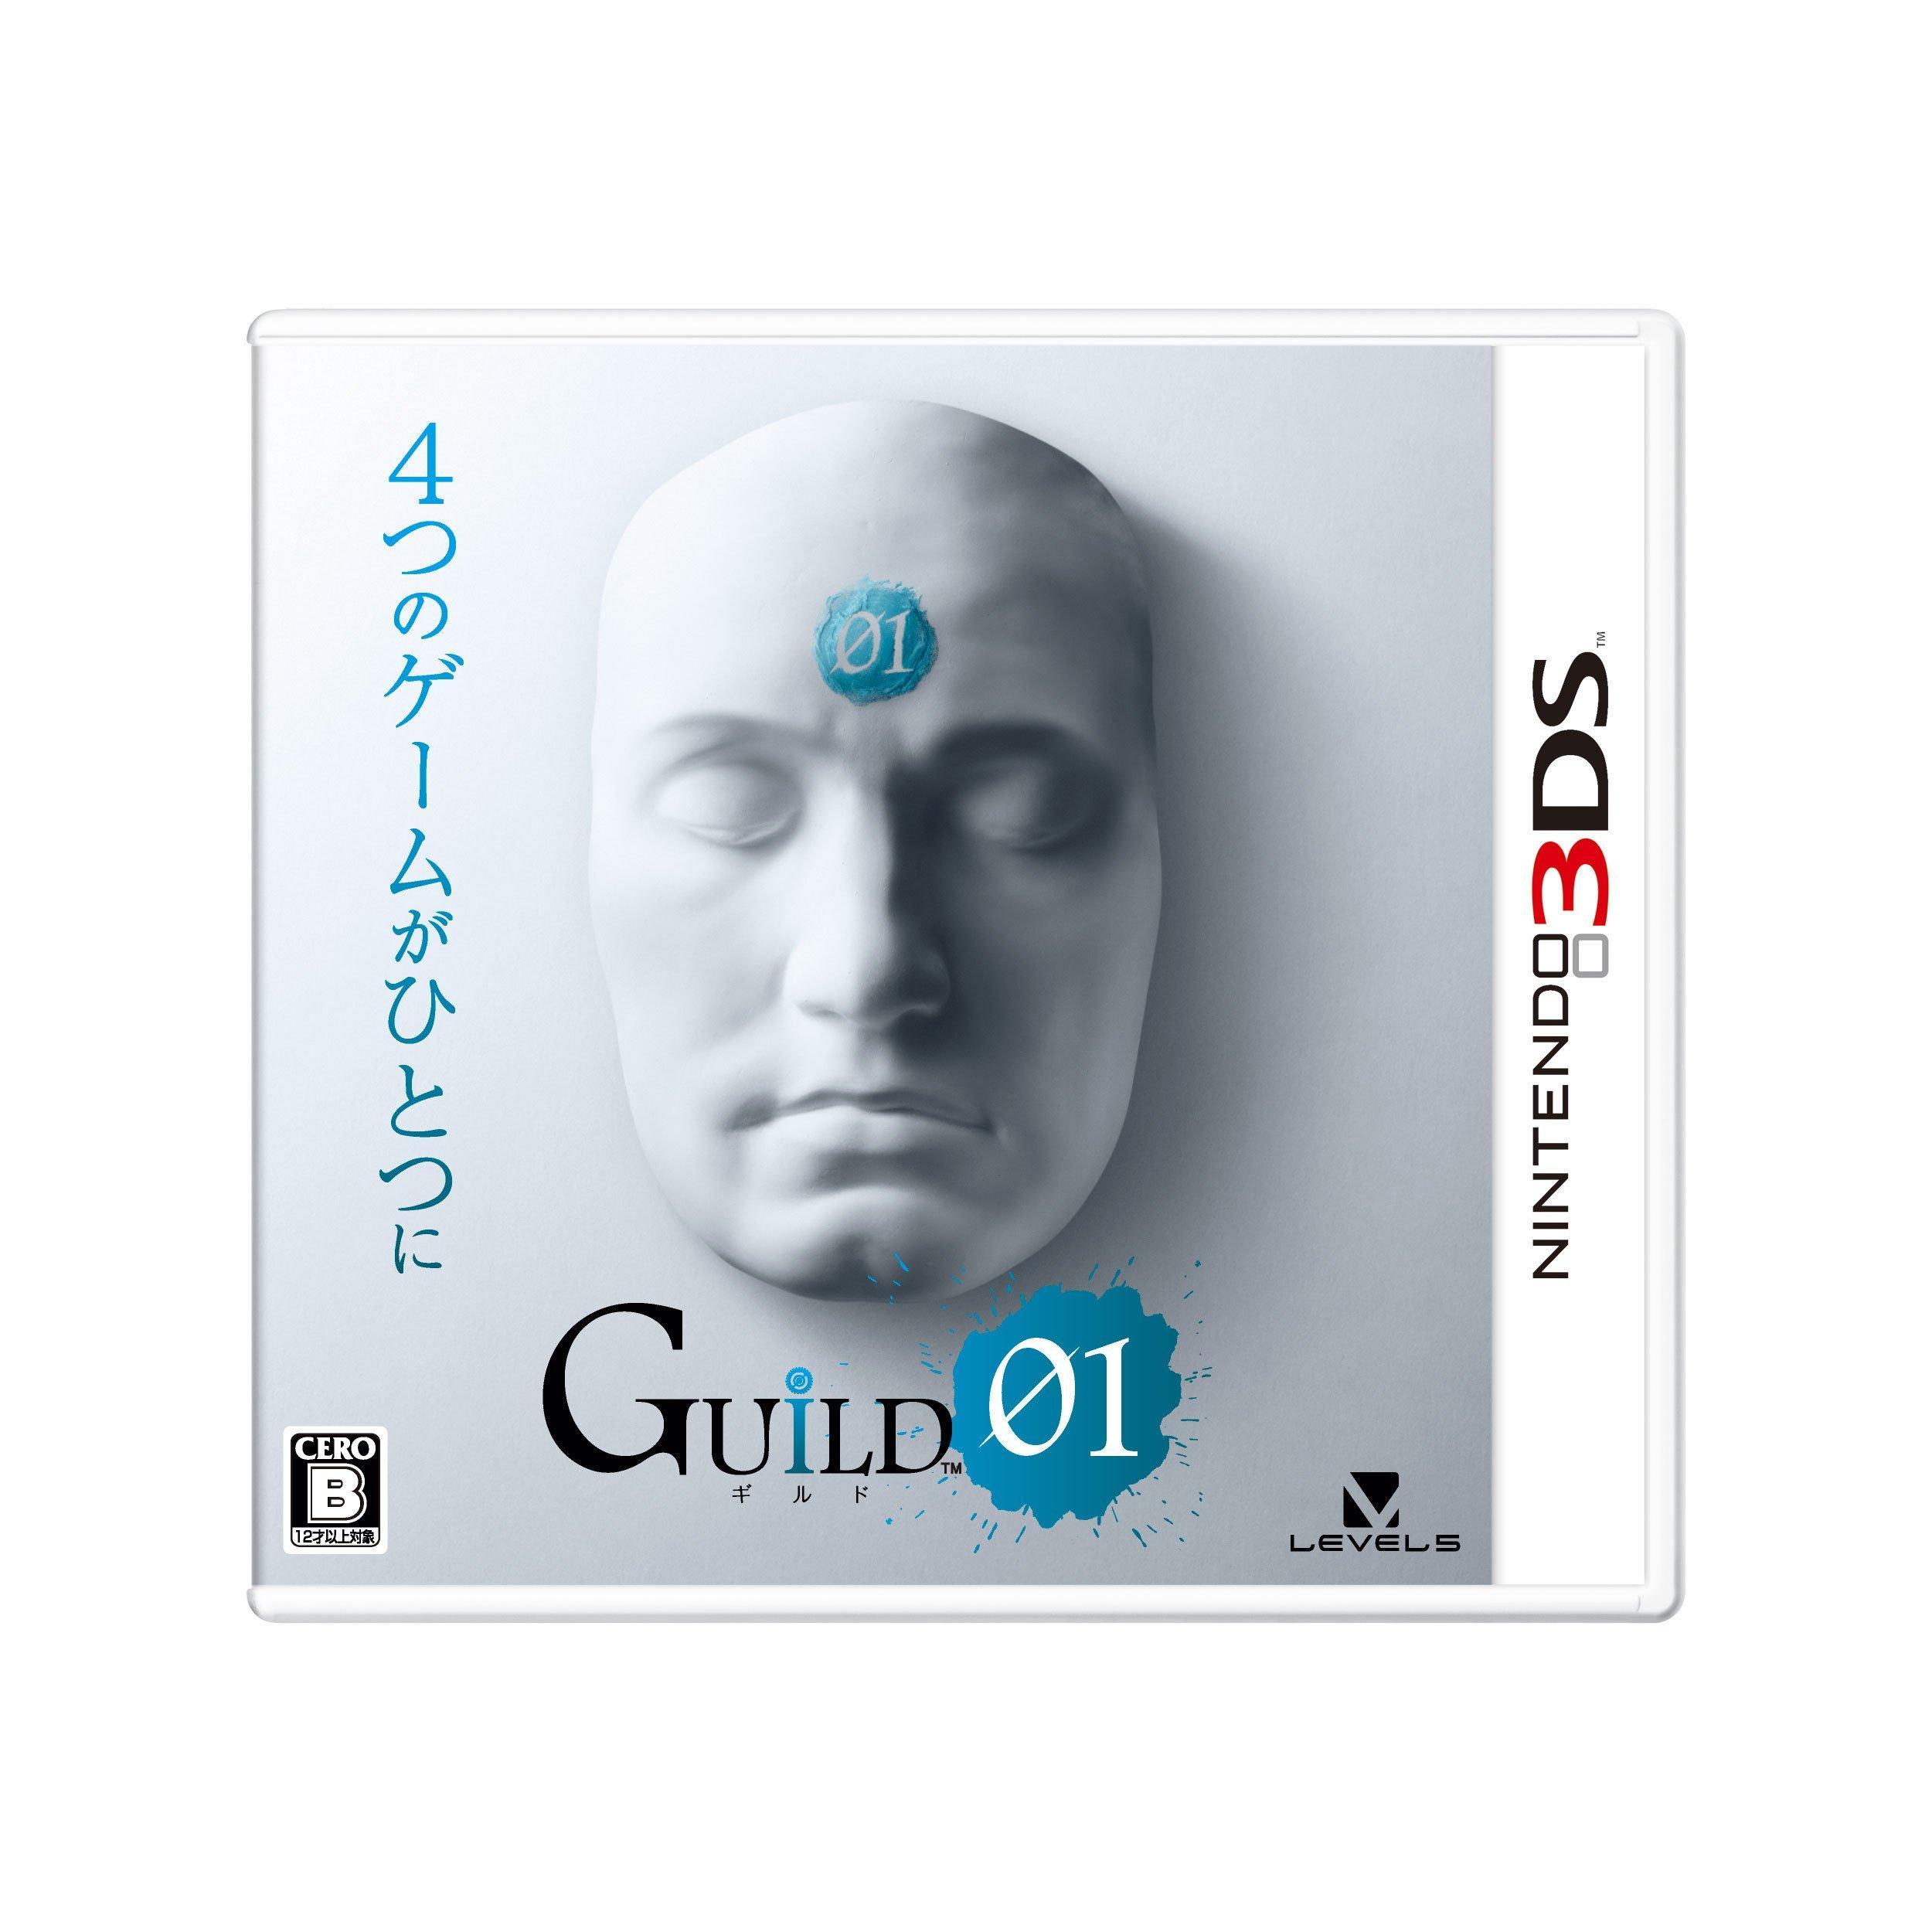 Guild 01 for 3ds 